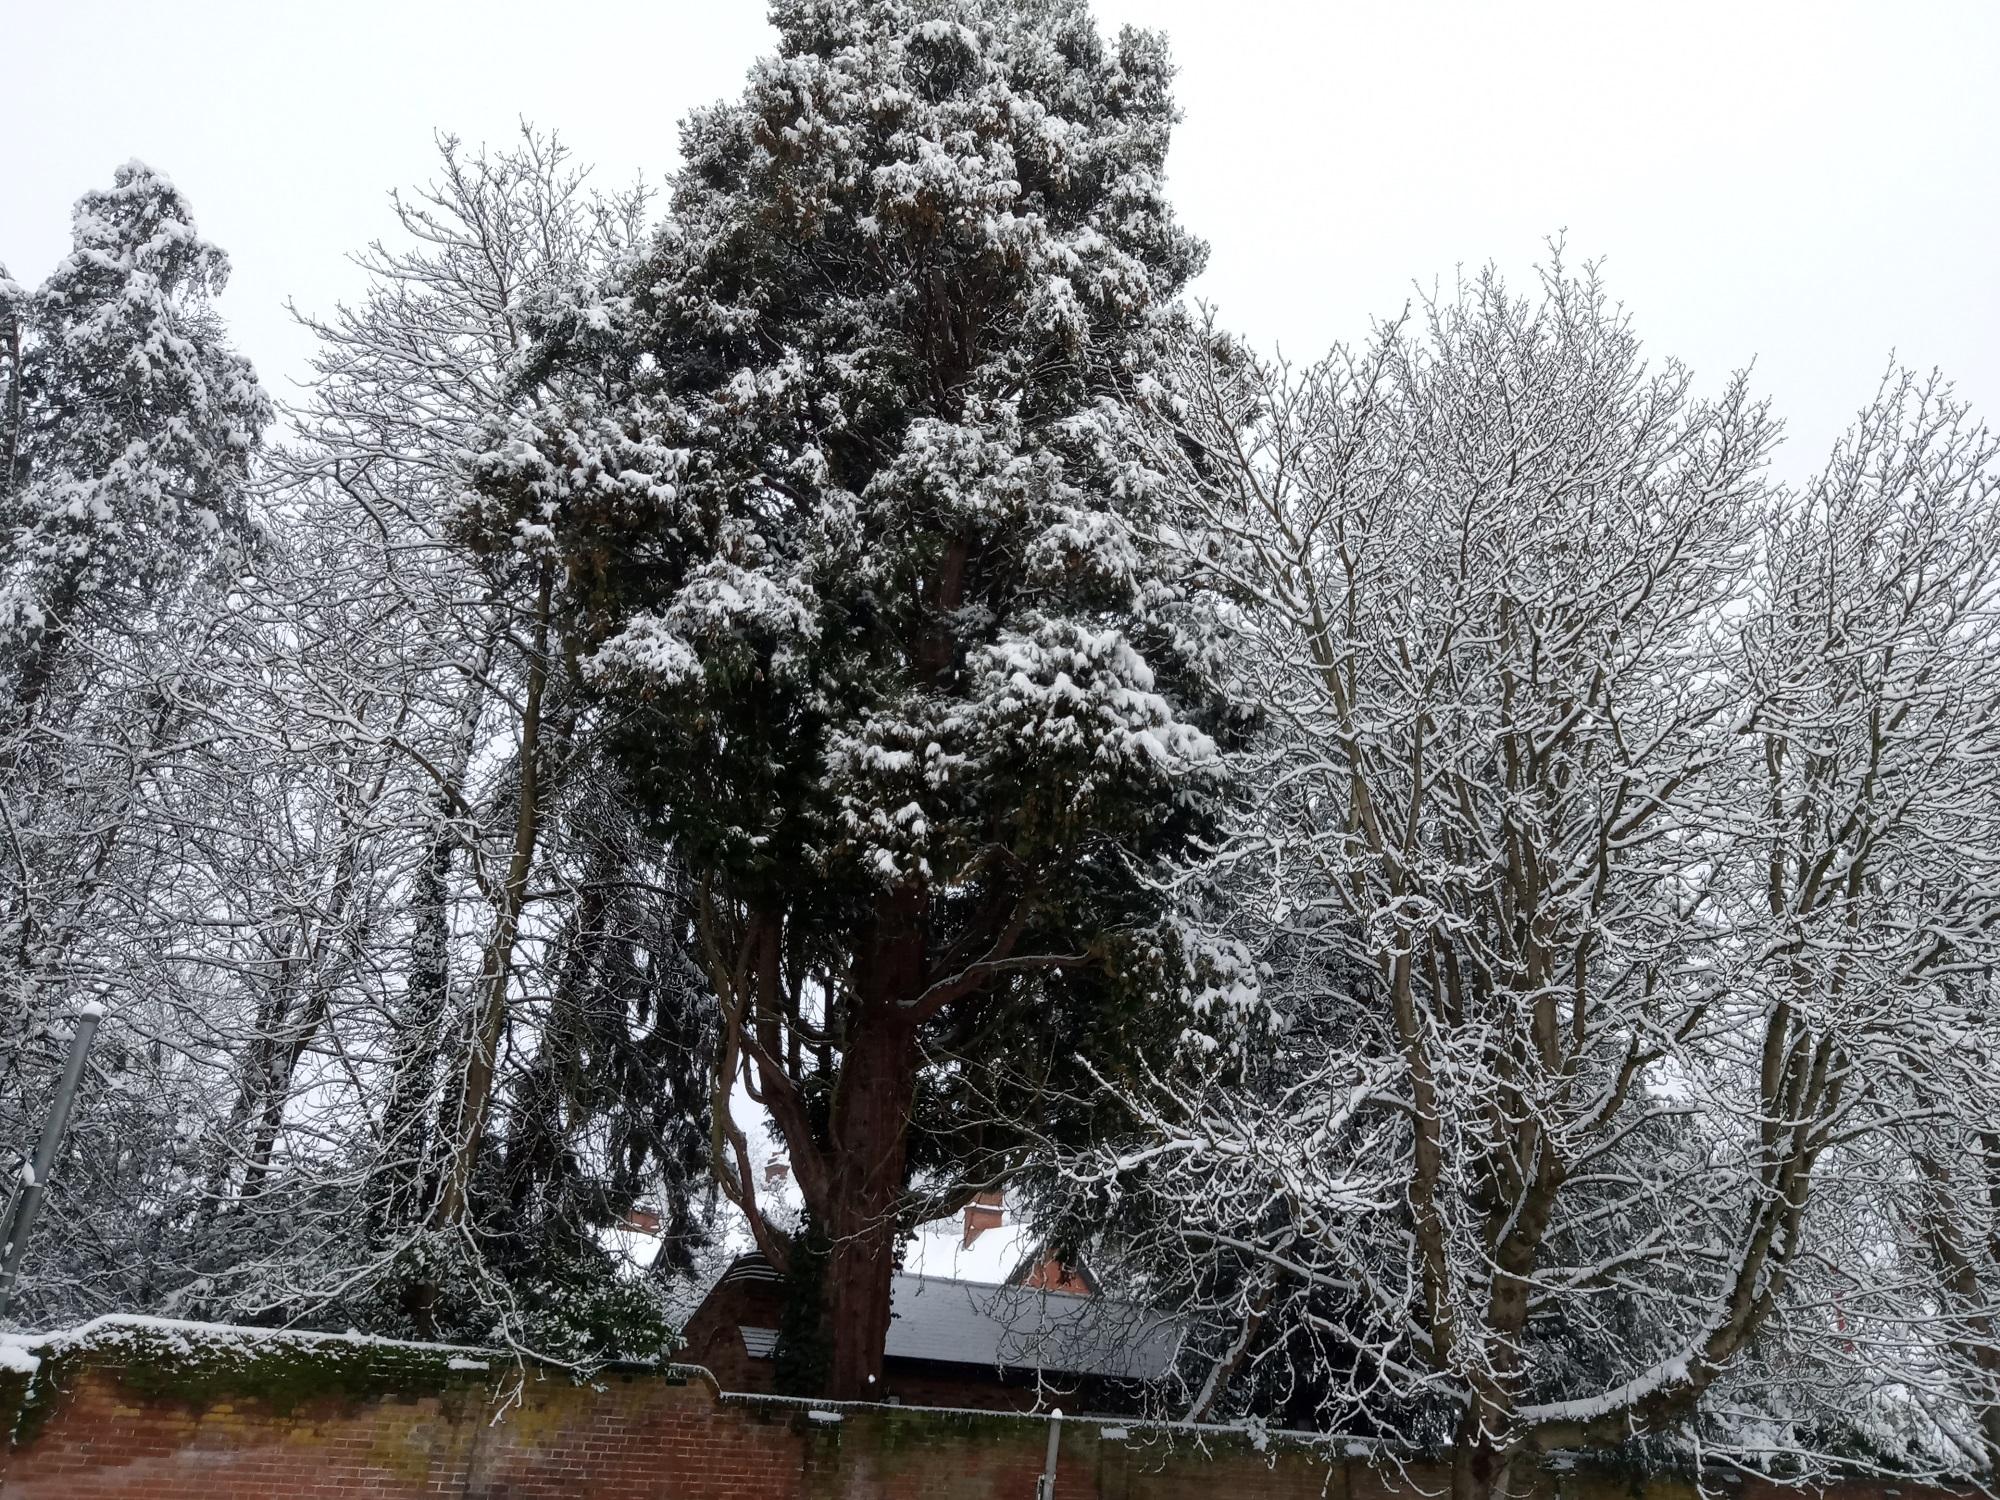 Trees in Chobham laden with fresh snow